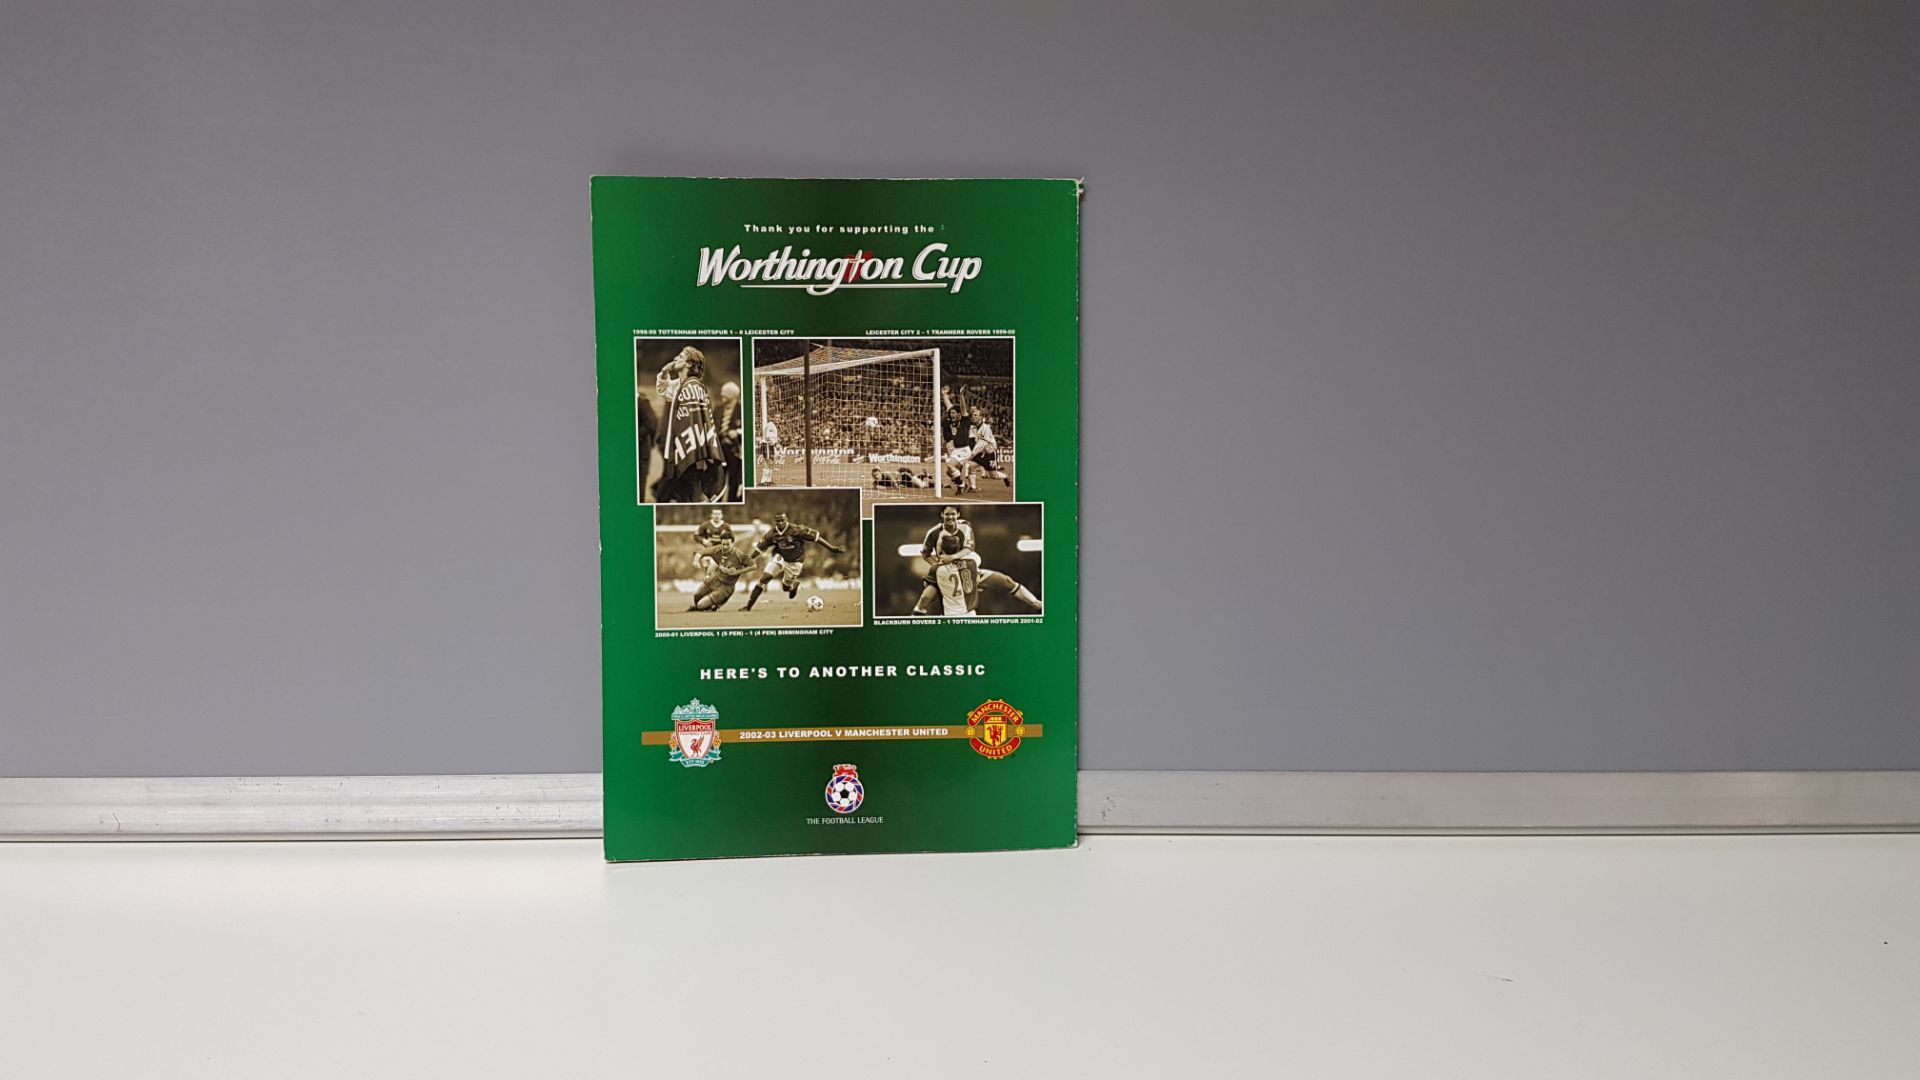 1 X OFFICIAL MATCHDAY PROGRAMME FOR THE WORTHINGTON CUP FINAL HELD AT THE MILLENIUM STADIUM ON THE - Image 2 of 2